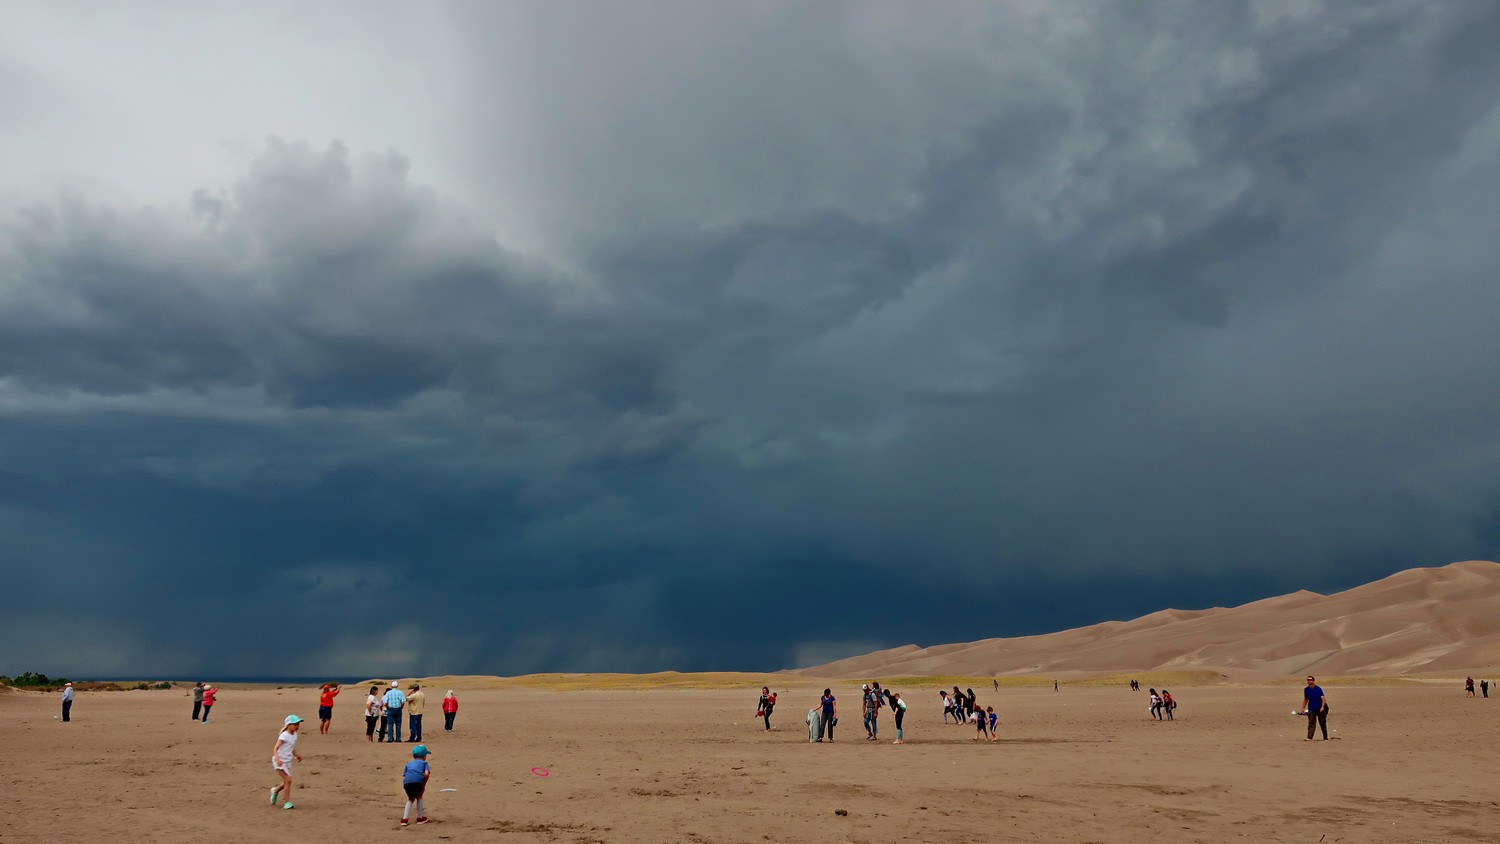 Crowded Great Sand Dunes National Park with black clouds - thunder and lightning are coming!